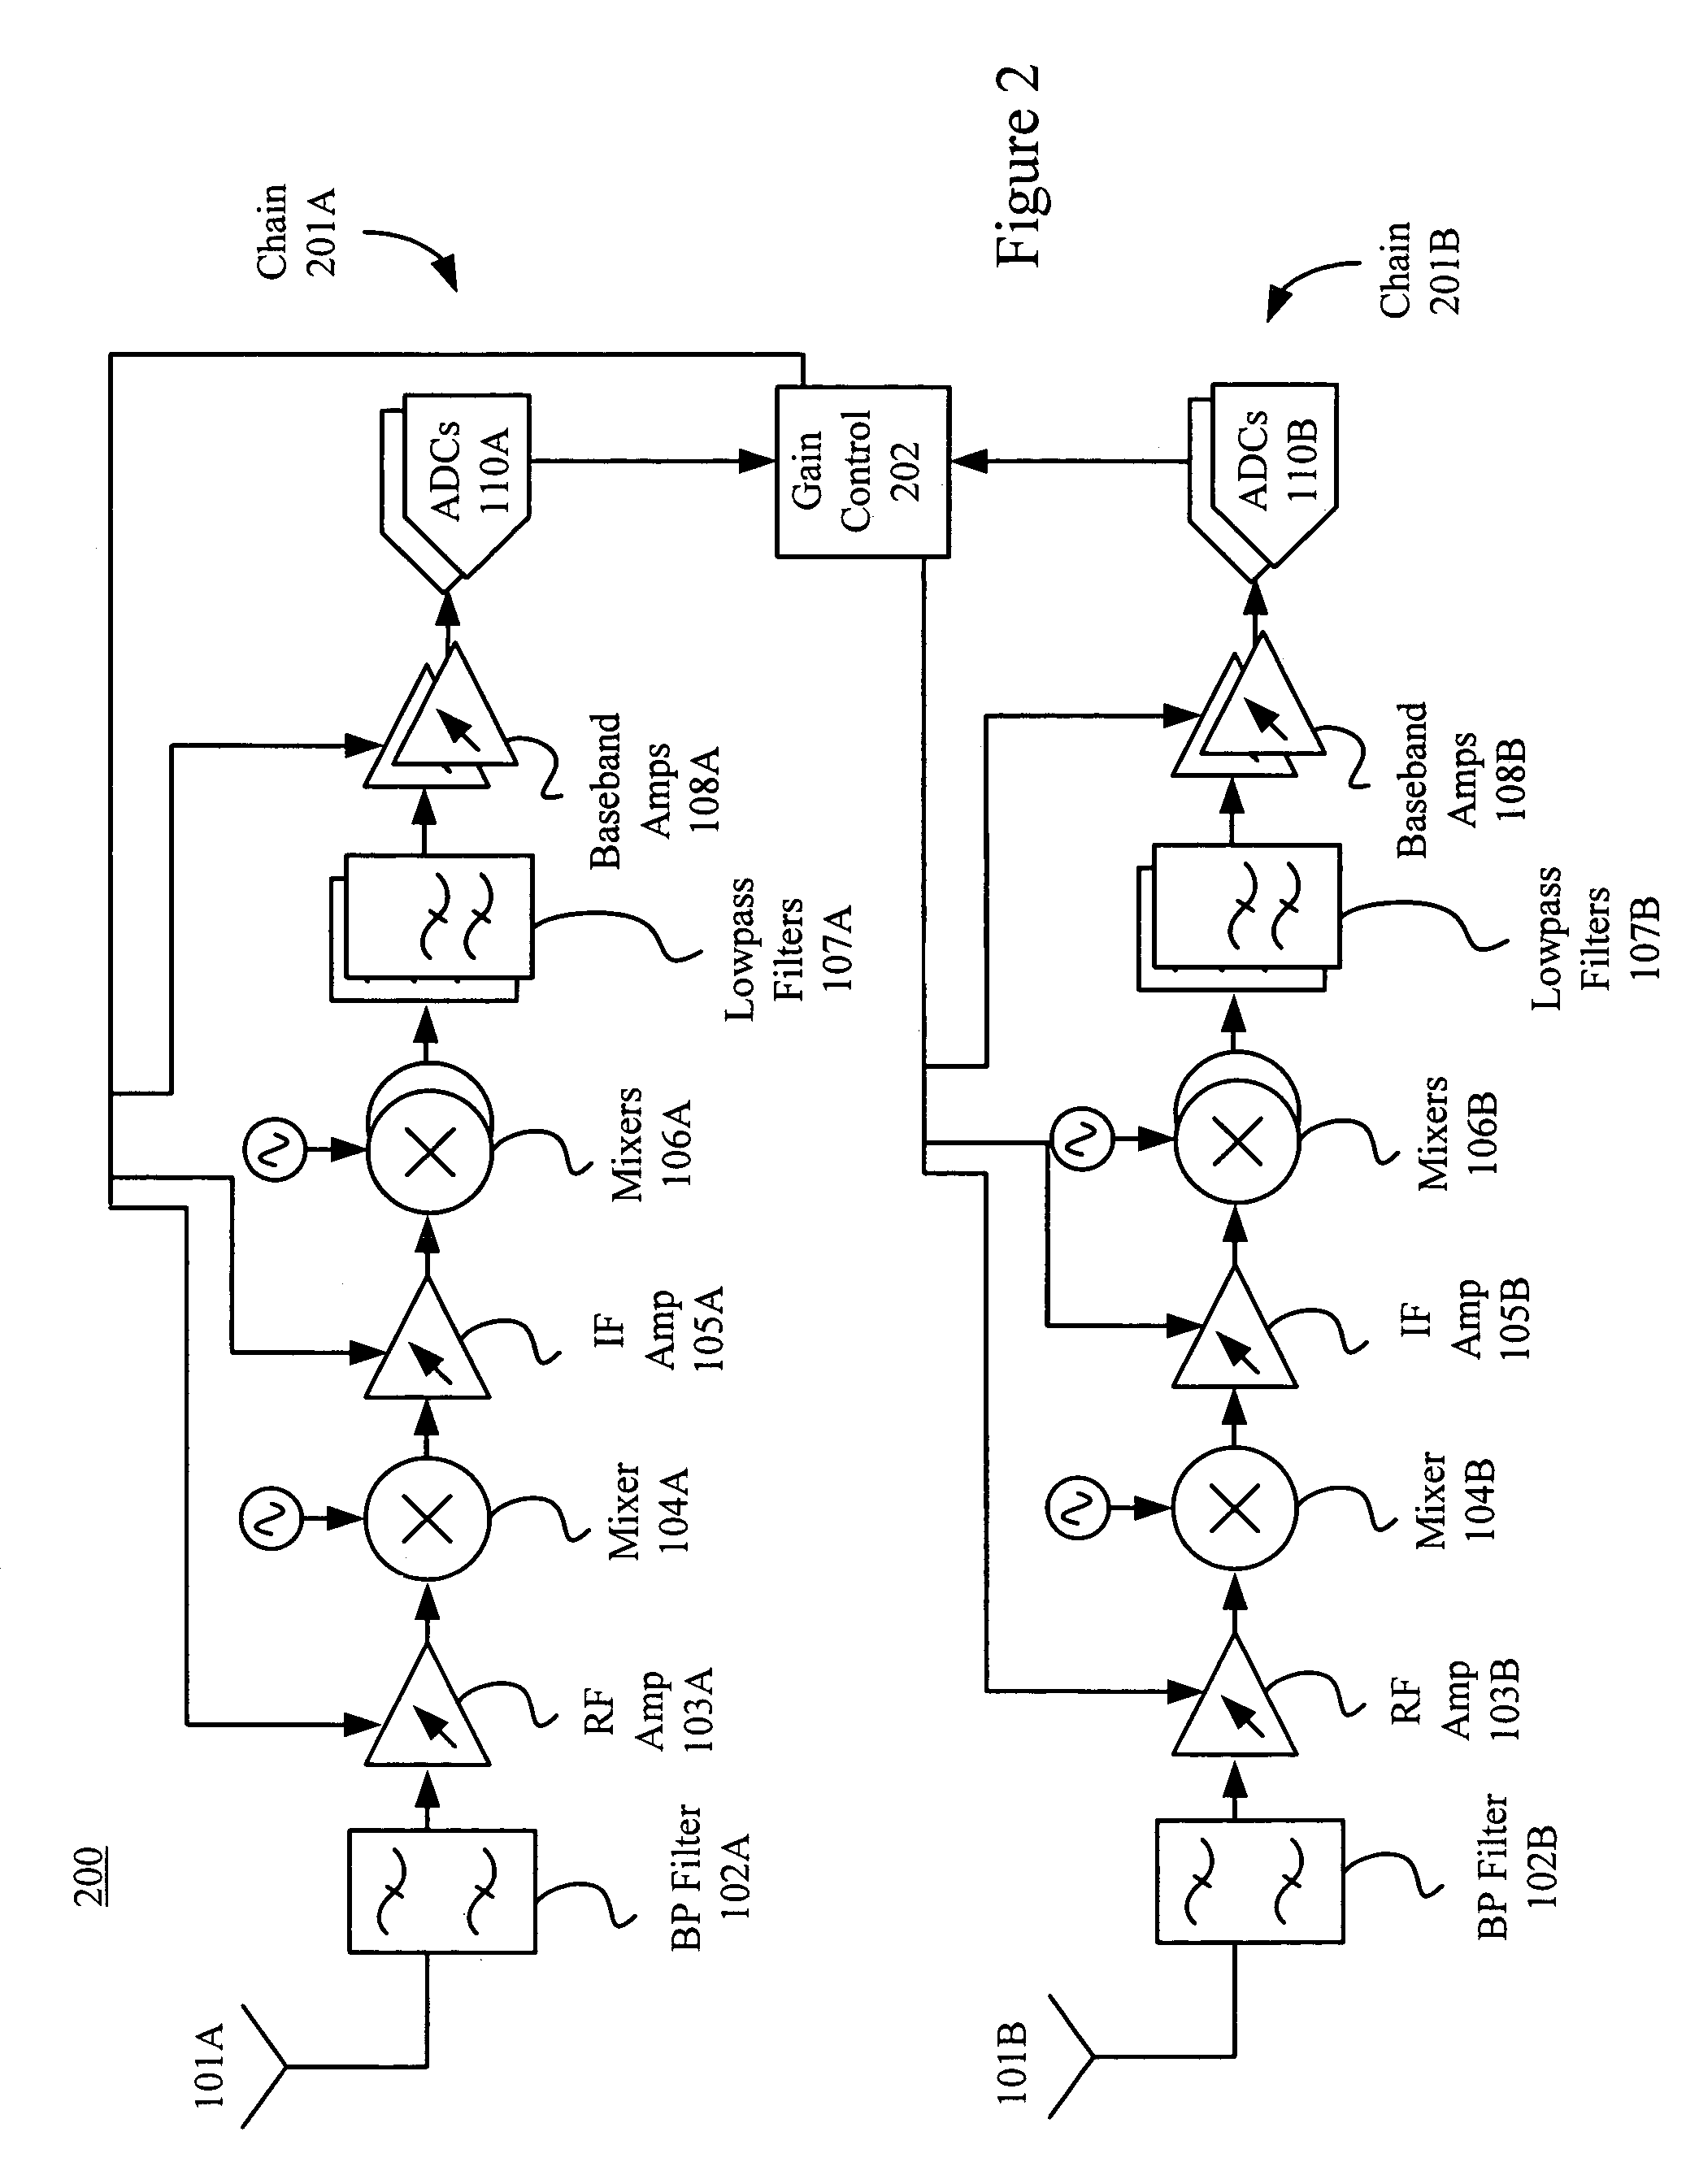 Multi-chain signal detection and gain control for automatic gain control systems